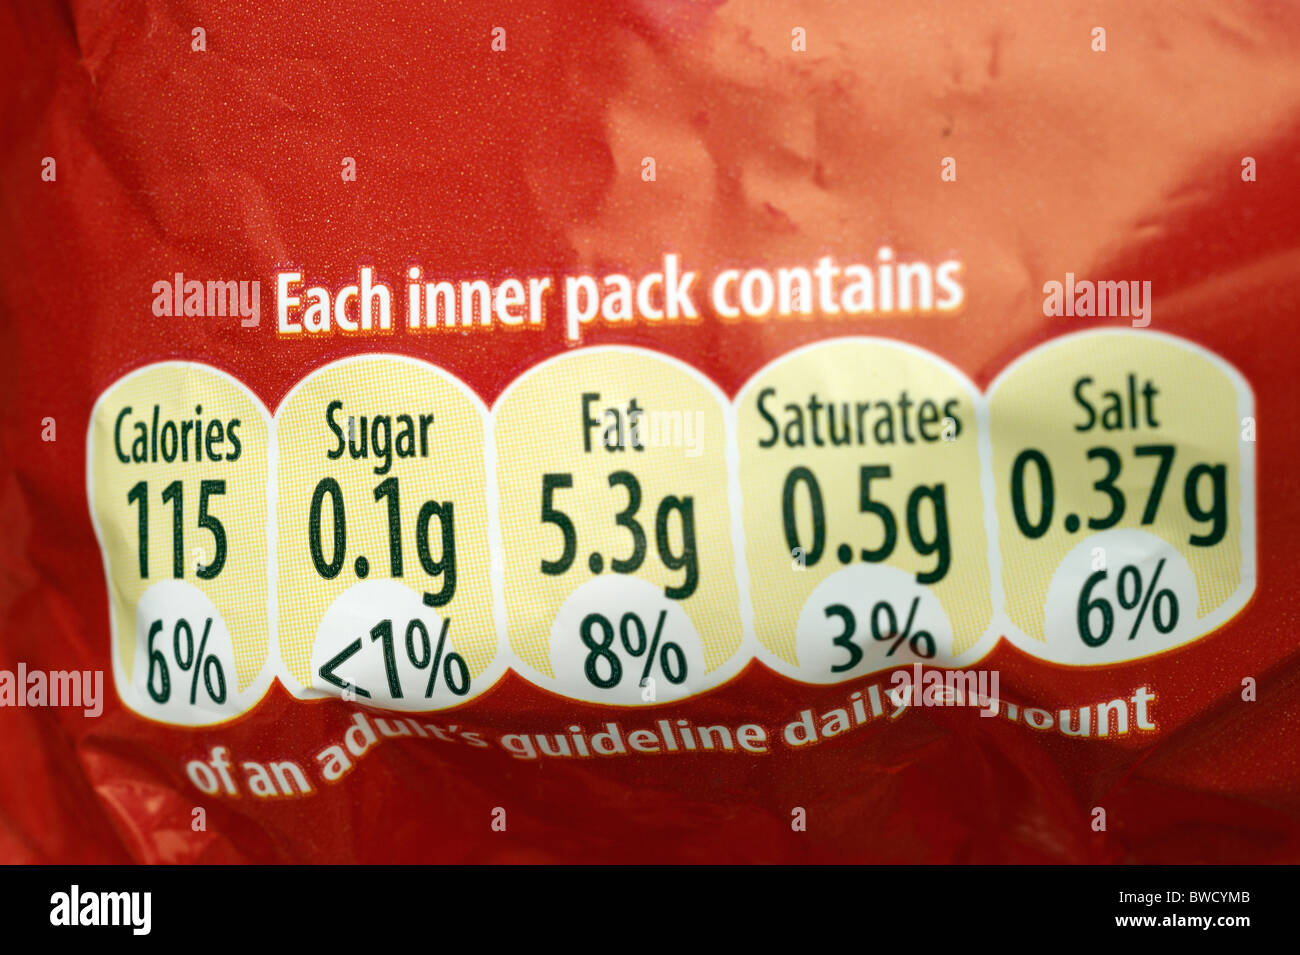 packet of crisps with nutritional information & guidelines Stock Photo